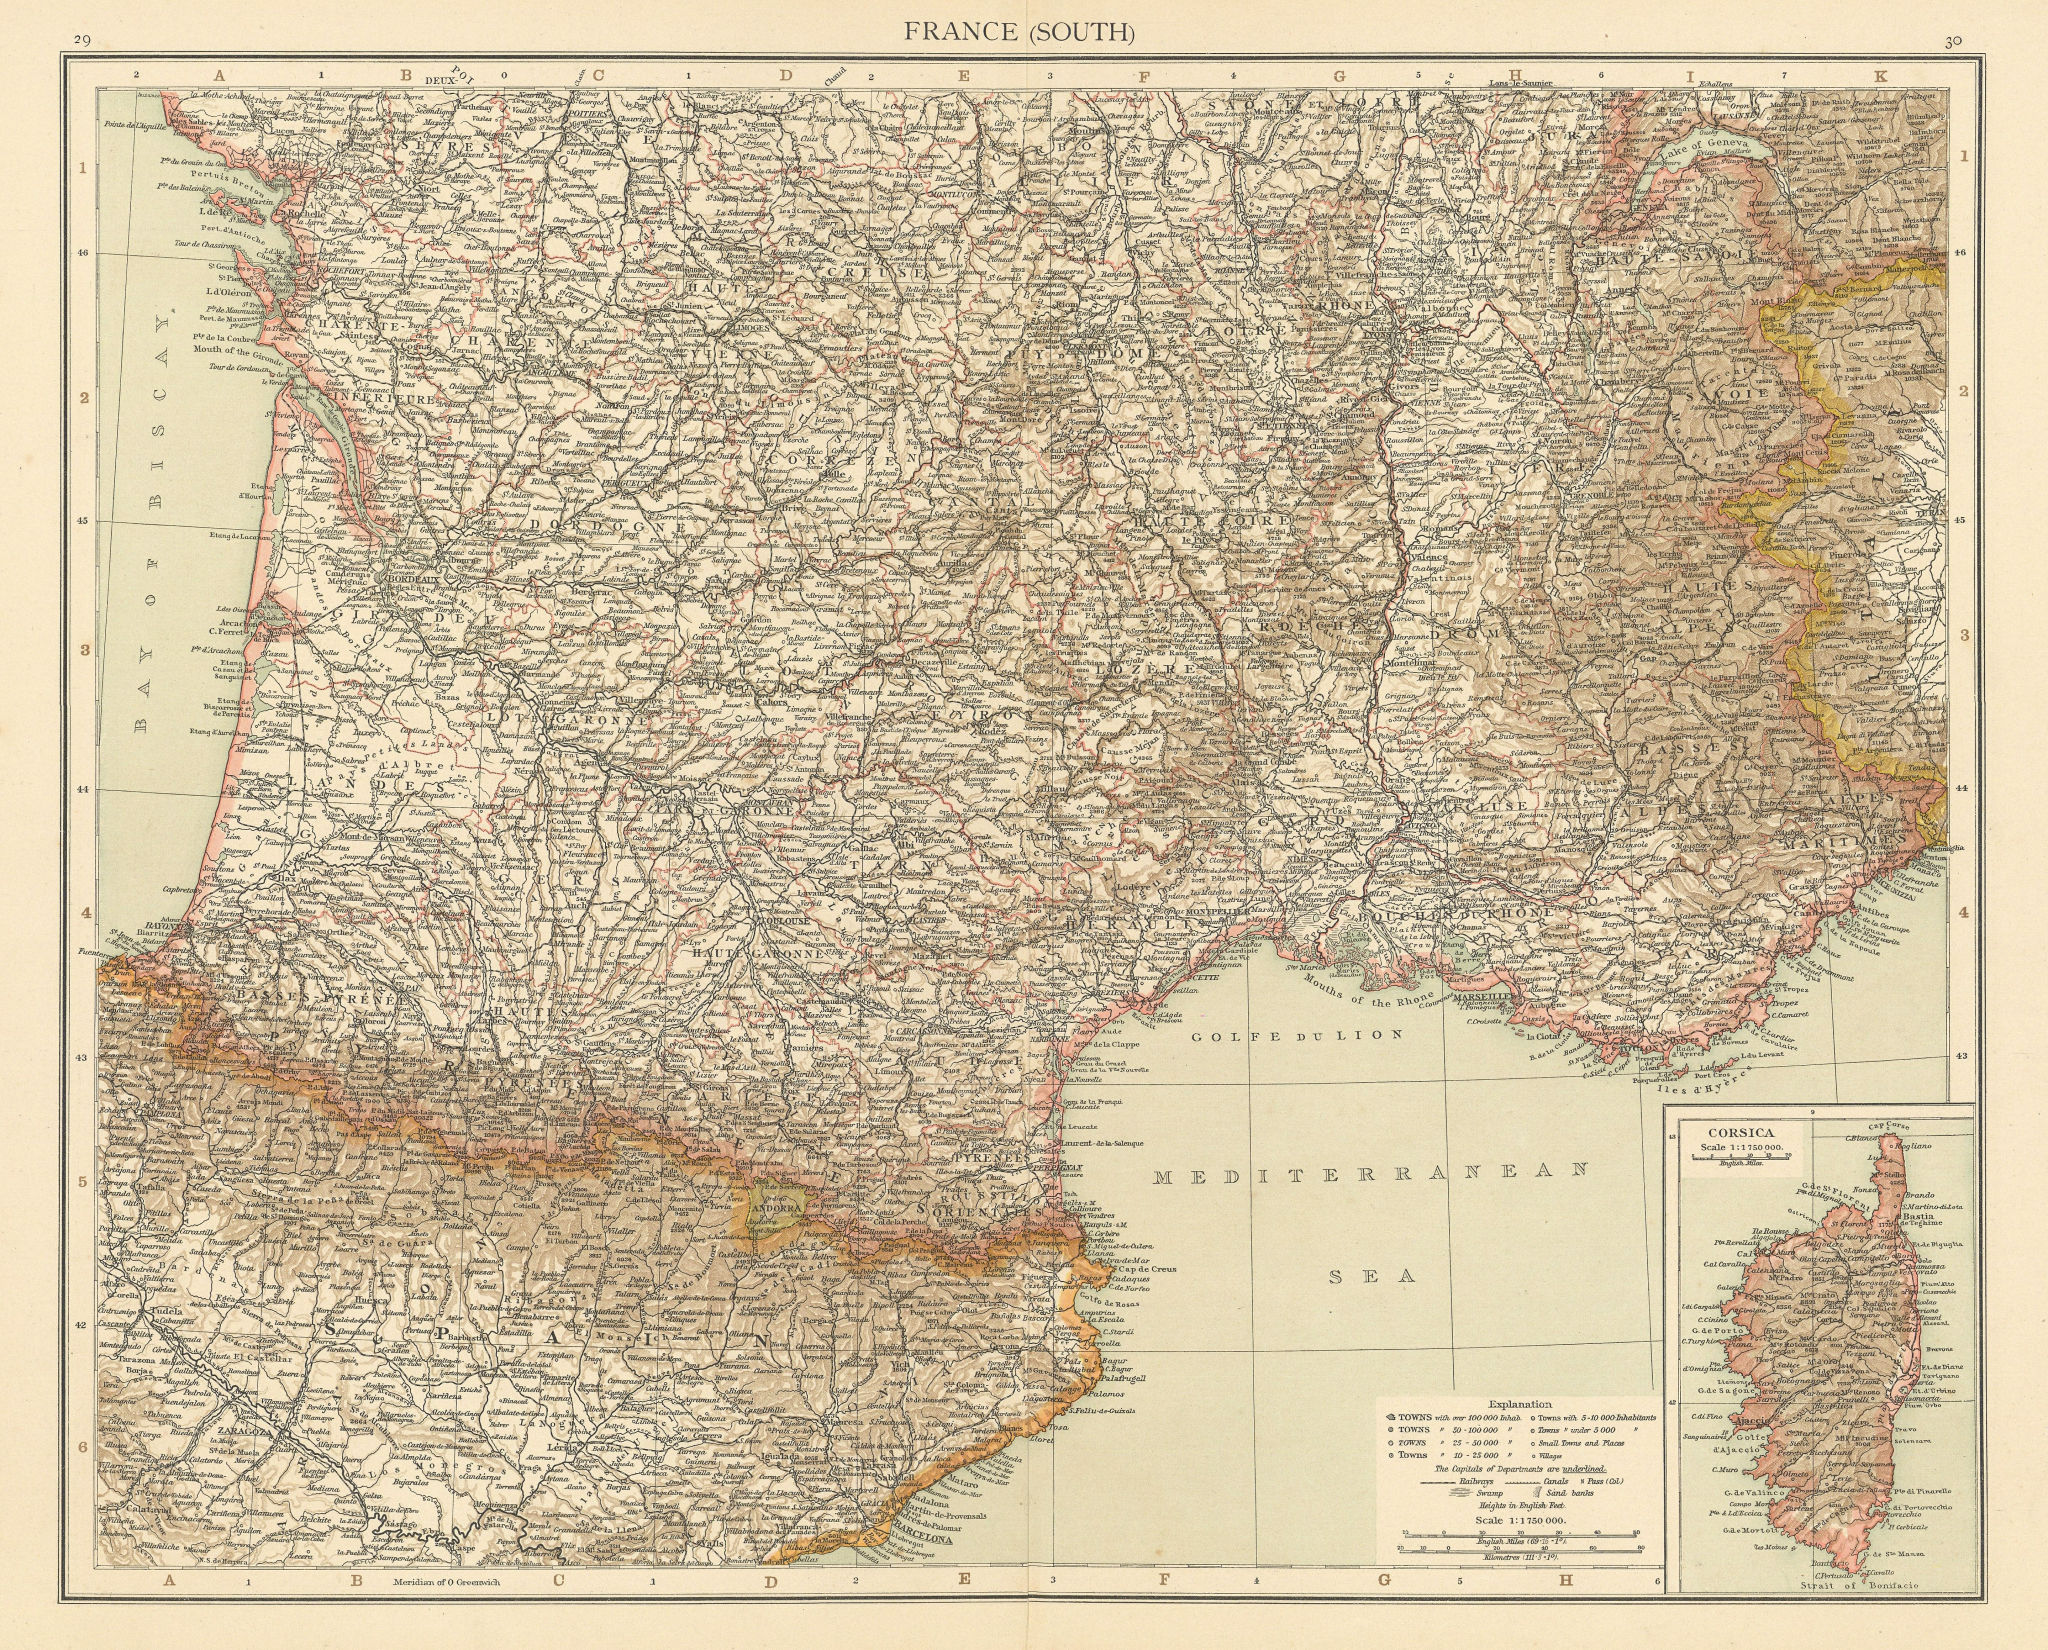 France (South). THE TIMES 1895 old antique vintage map plan chart